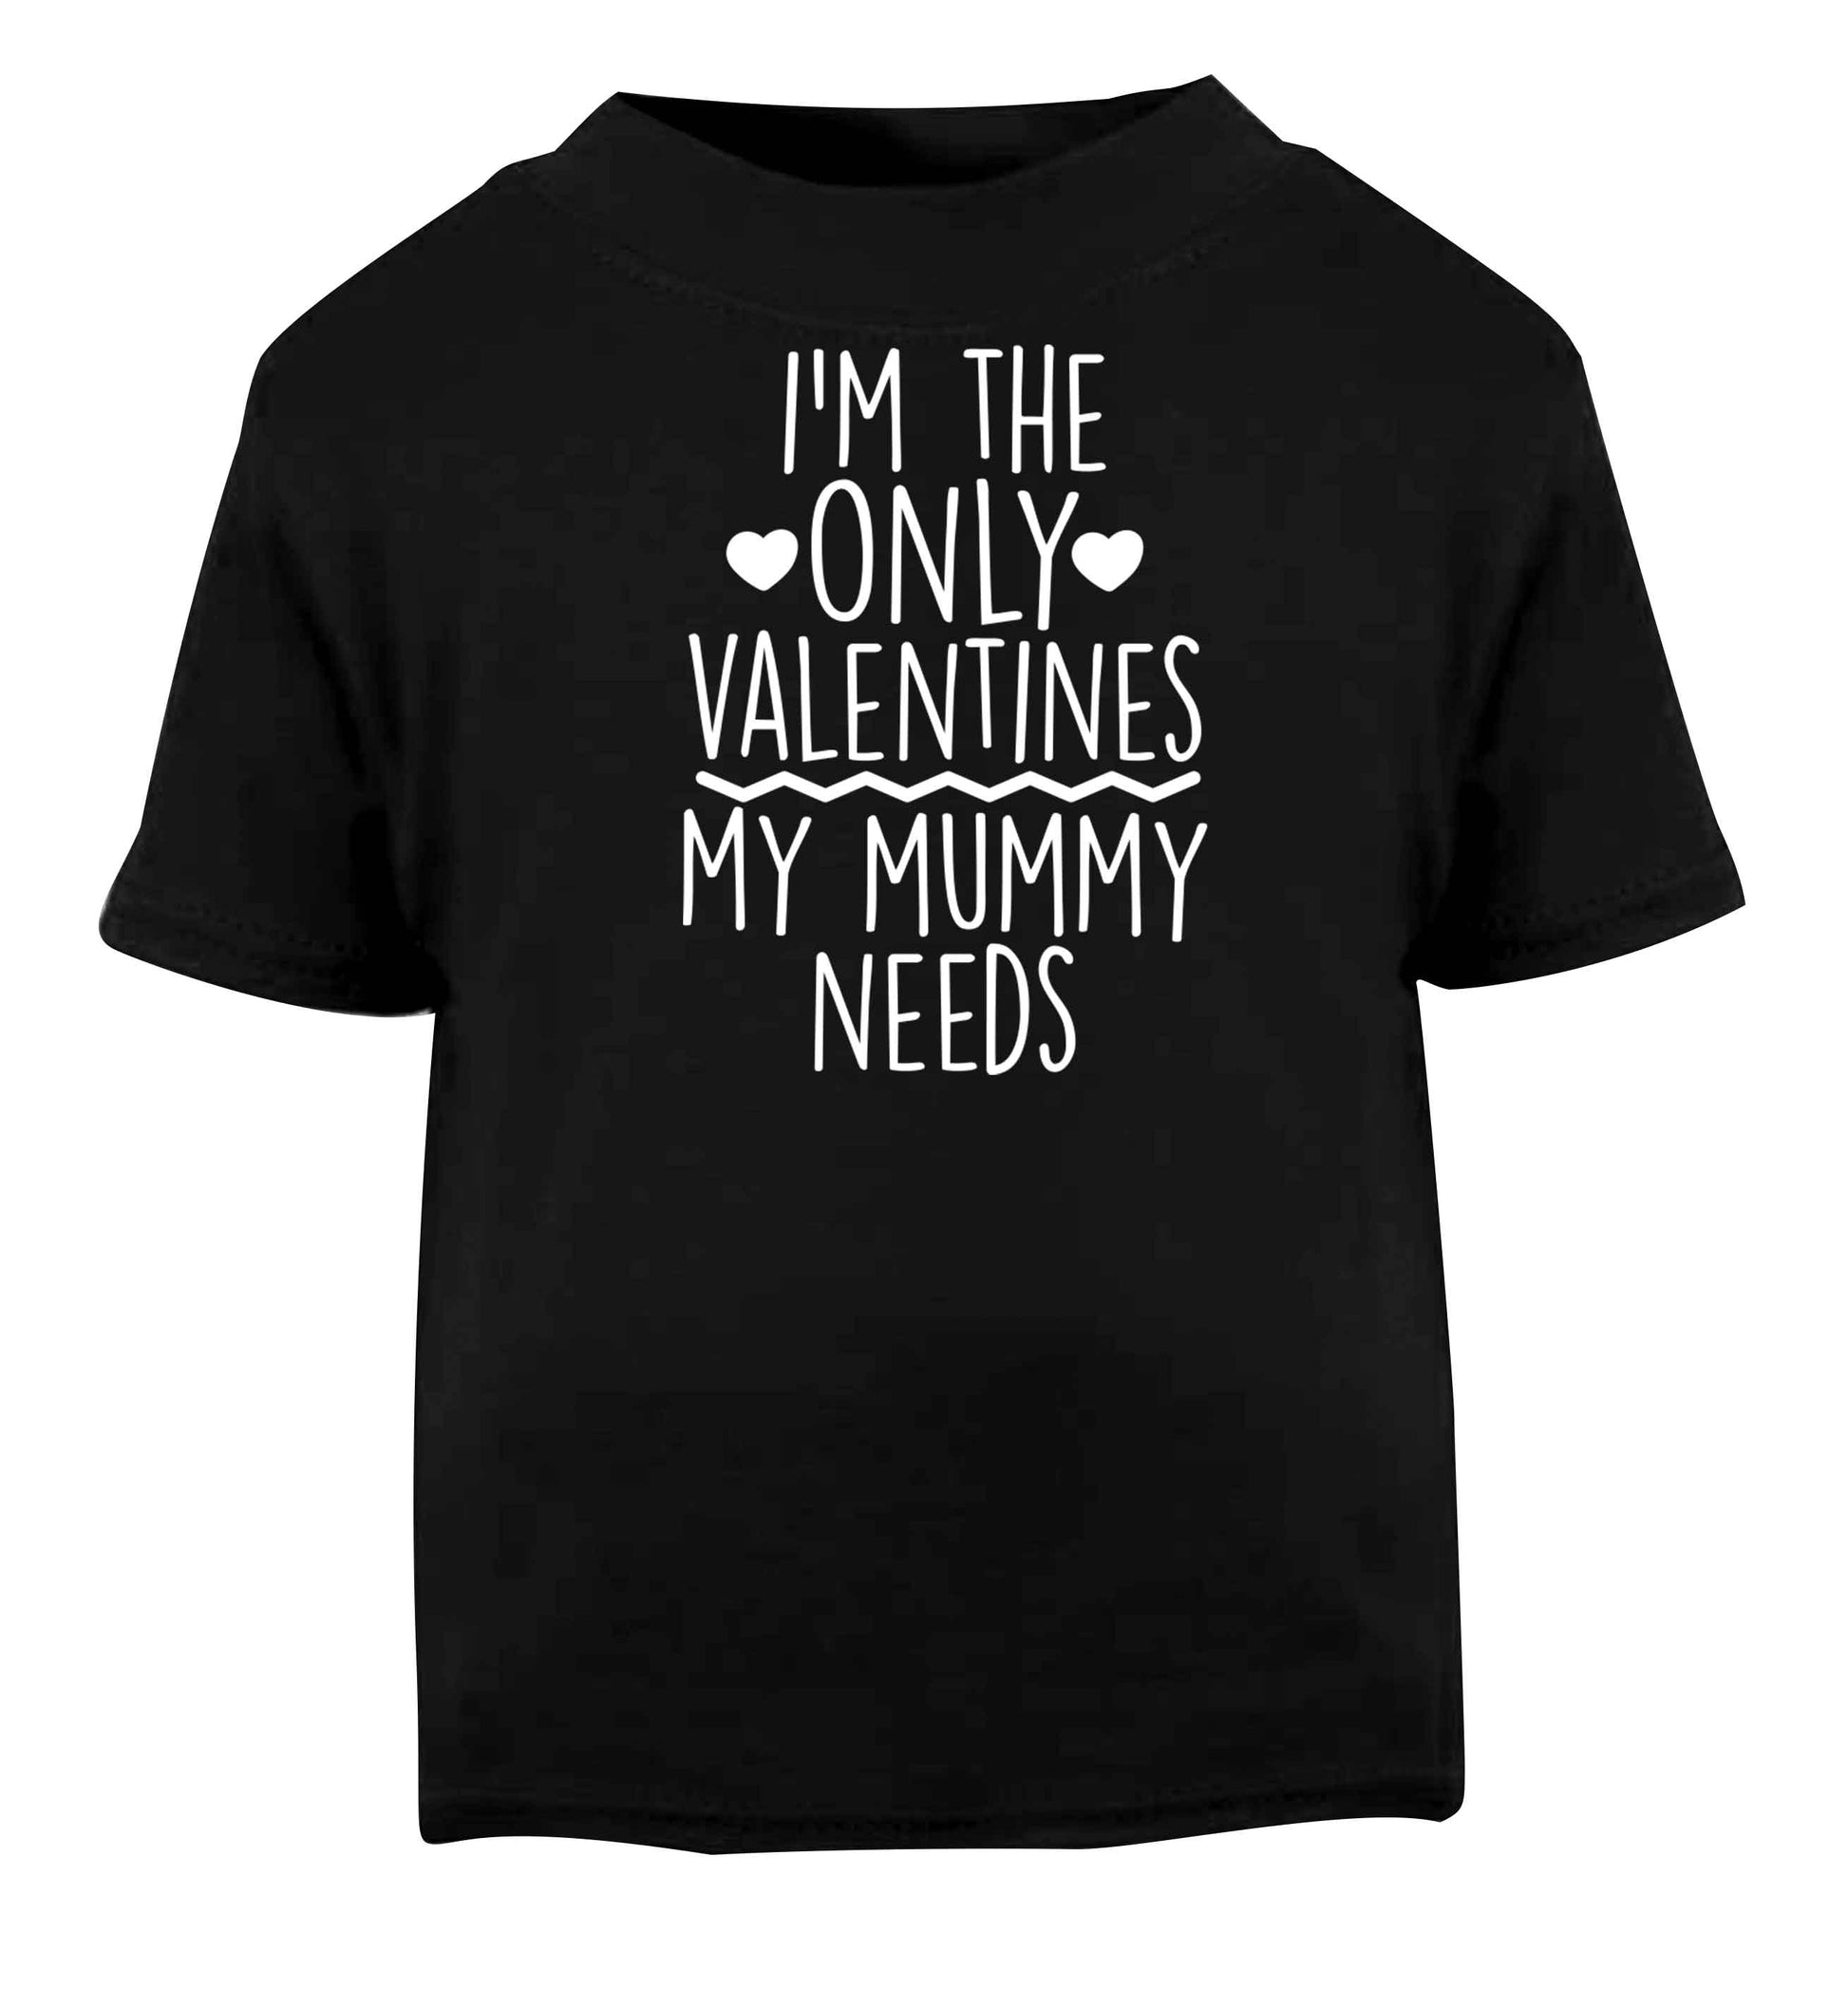 I'm the only valentines my mummy needs Black baby toddler Tshirt 2 years